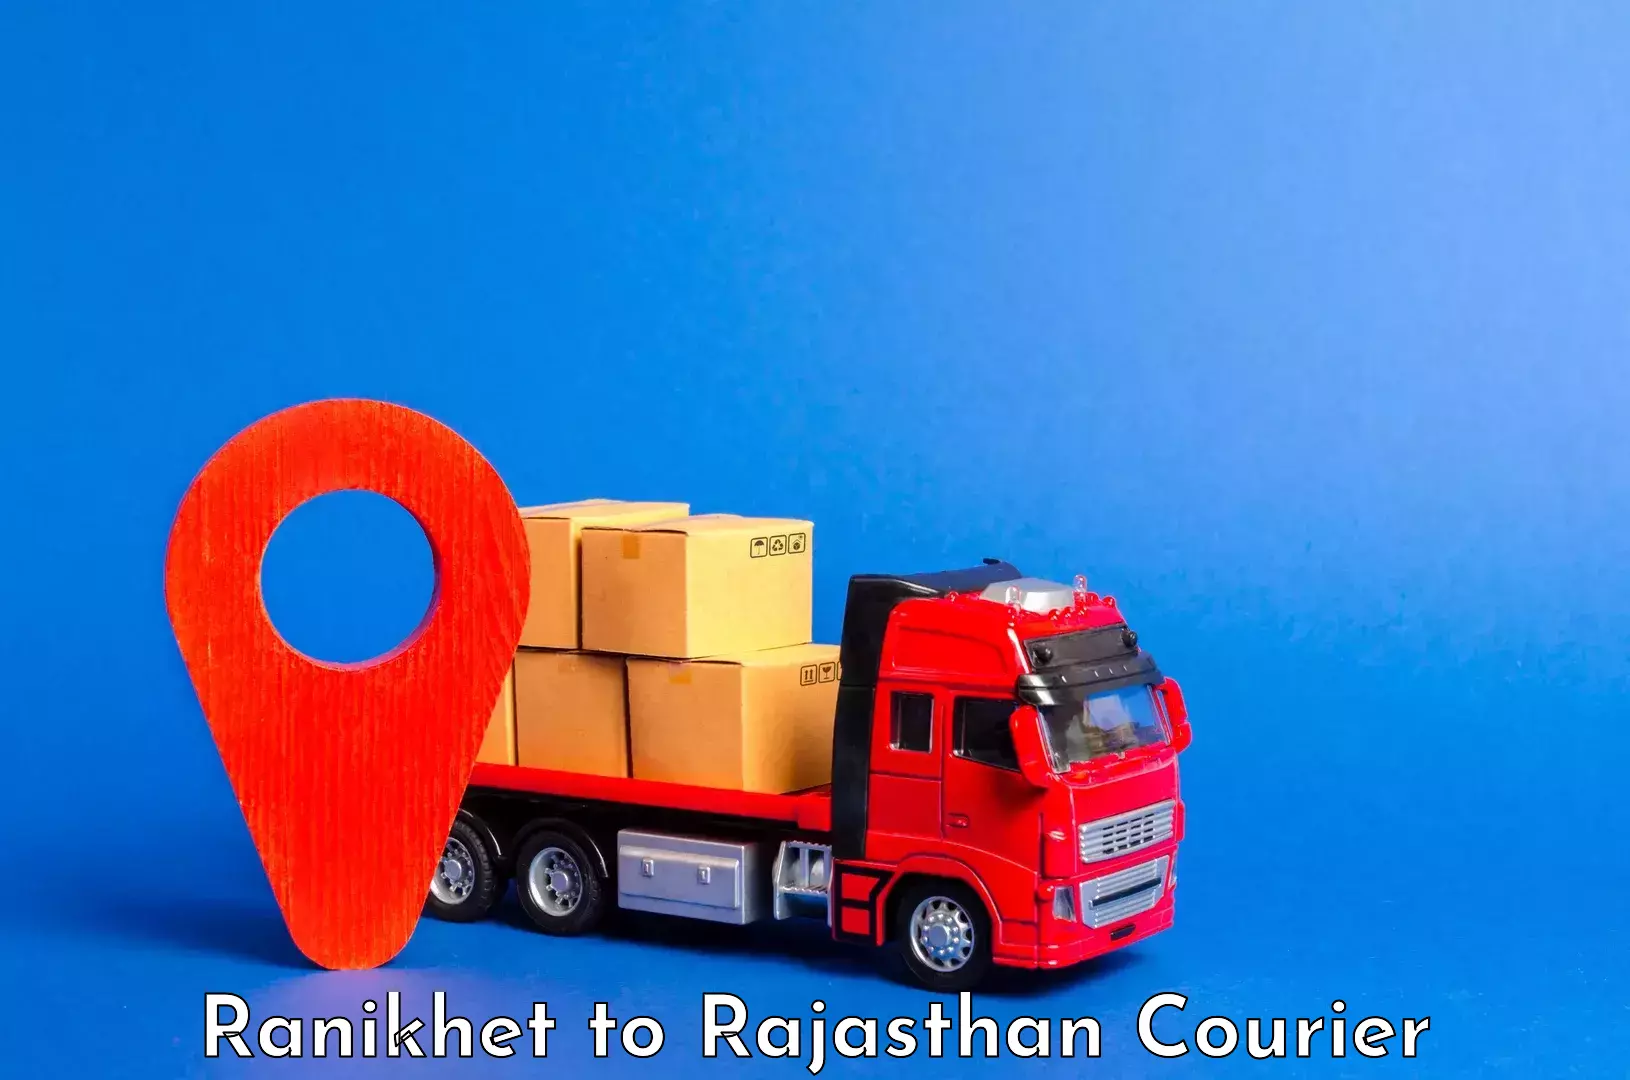 Excess baggage transport in Ranikhet to Rajasthan